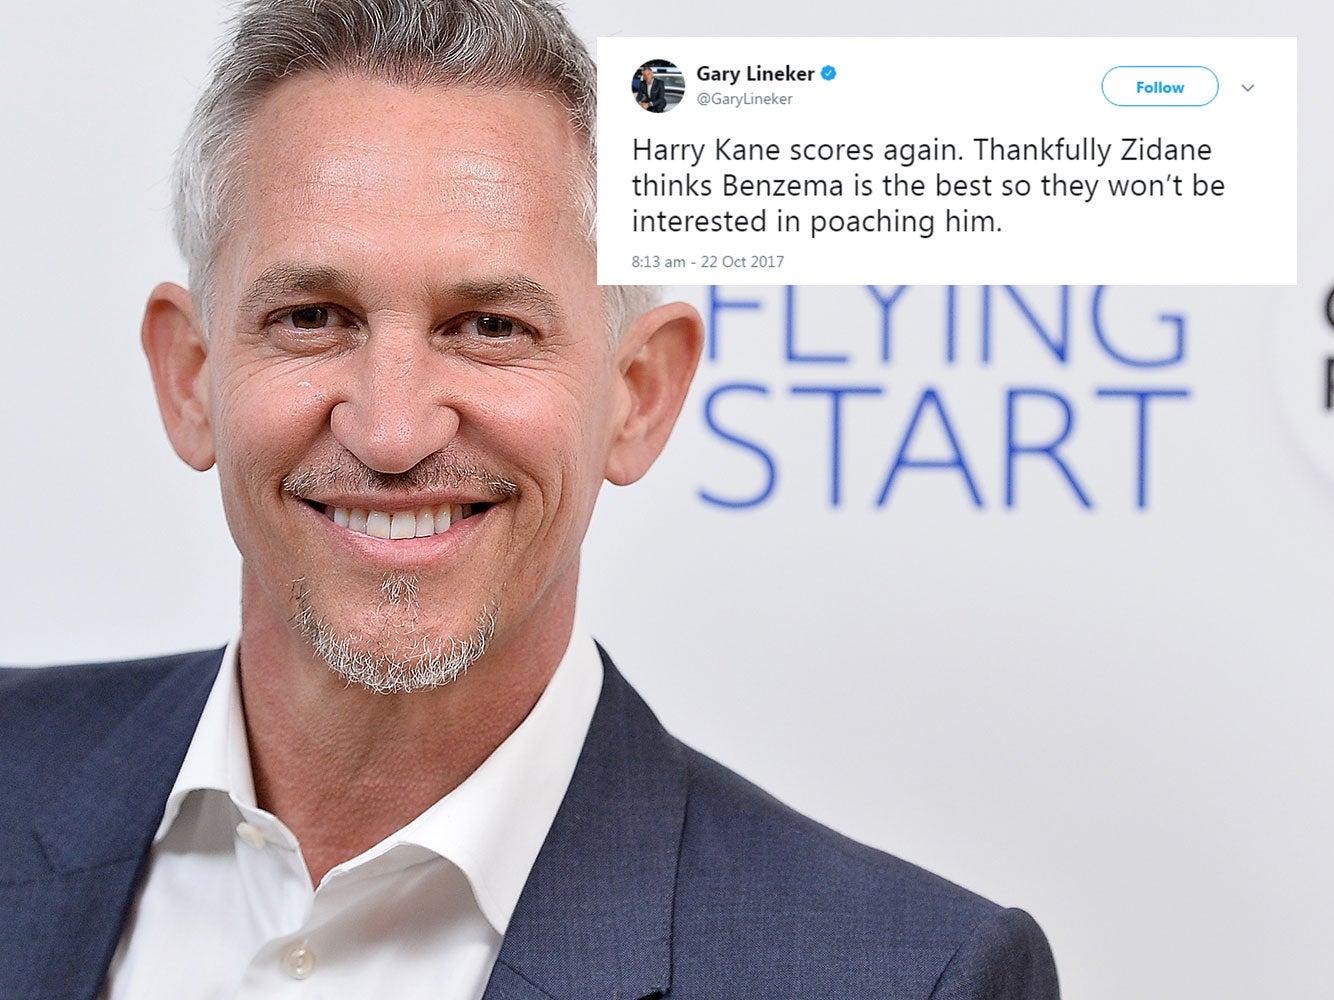 Lineker has caused some controversy with his Benzema comments